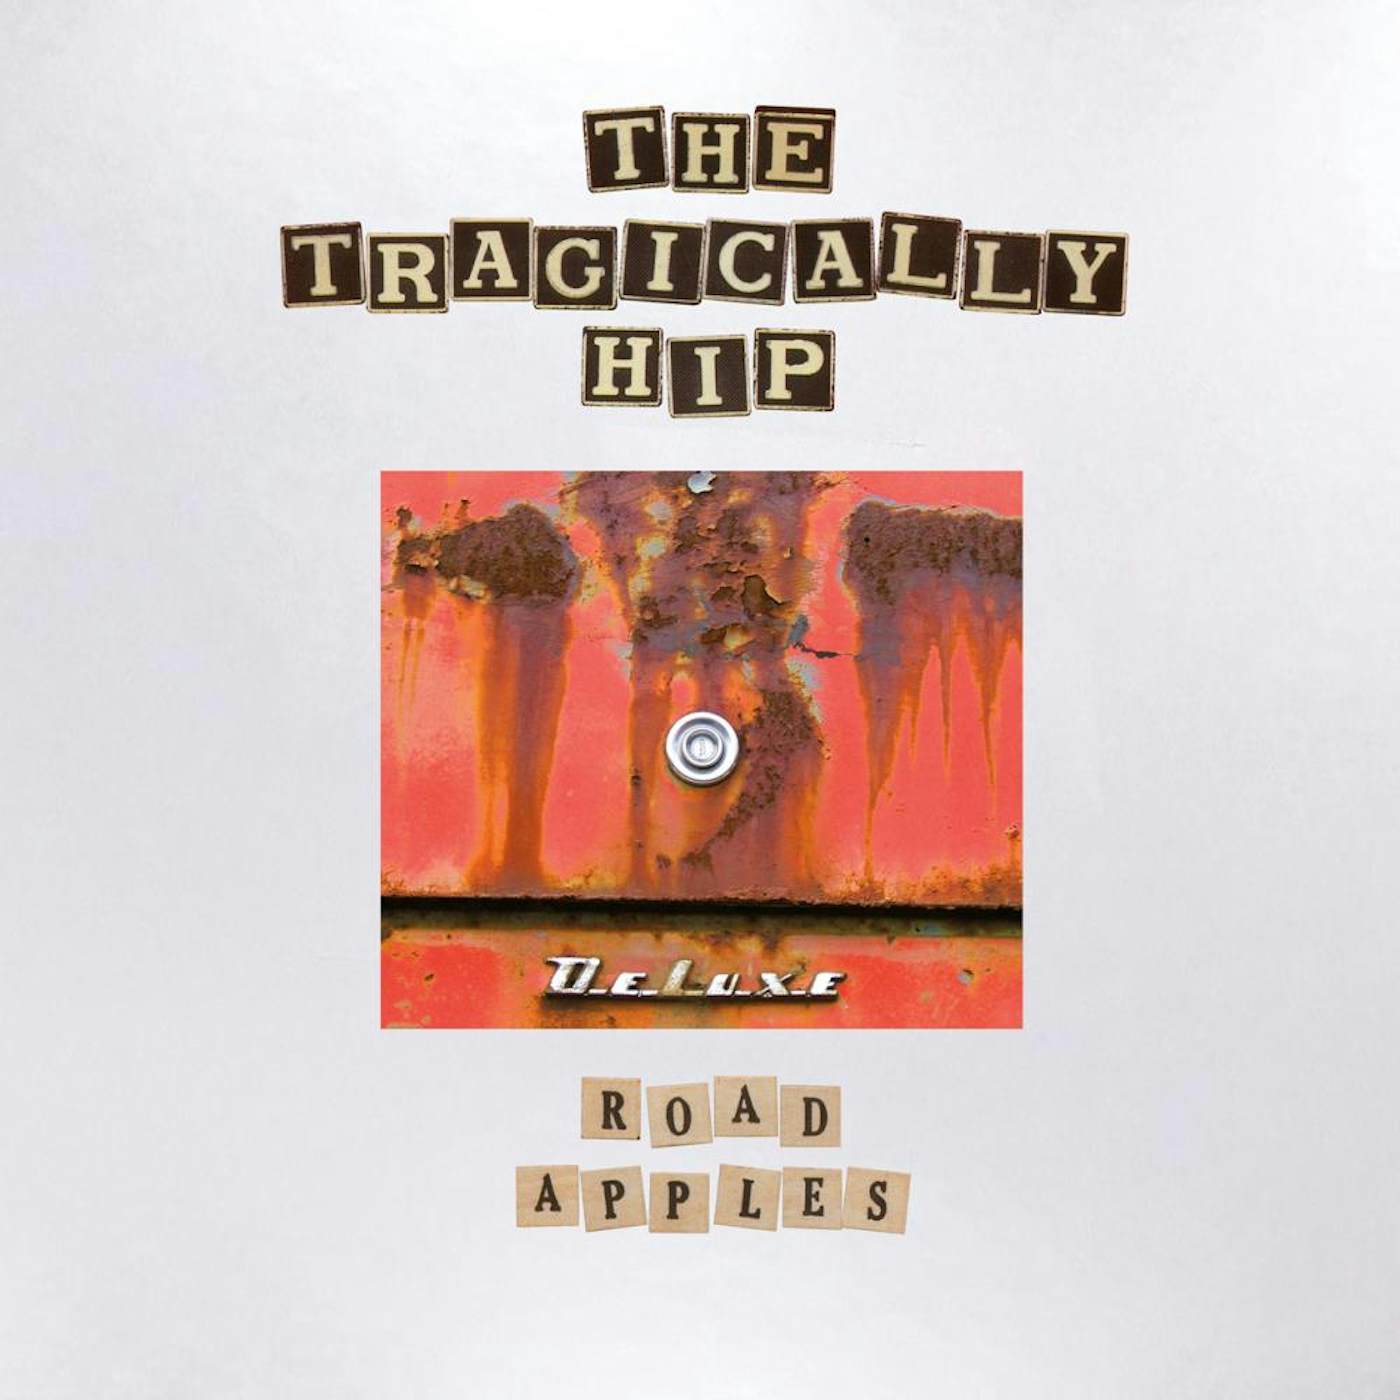 The Tragically Hip ROAD APPLES (30TH ANNIVERSARY) CD